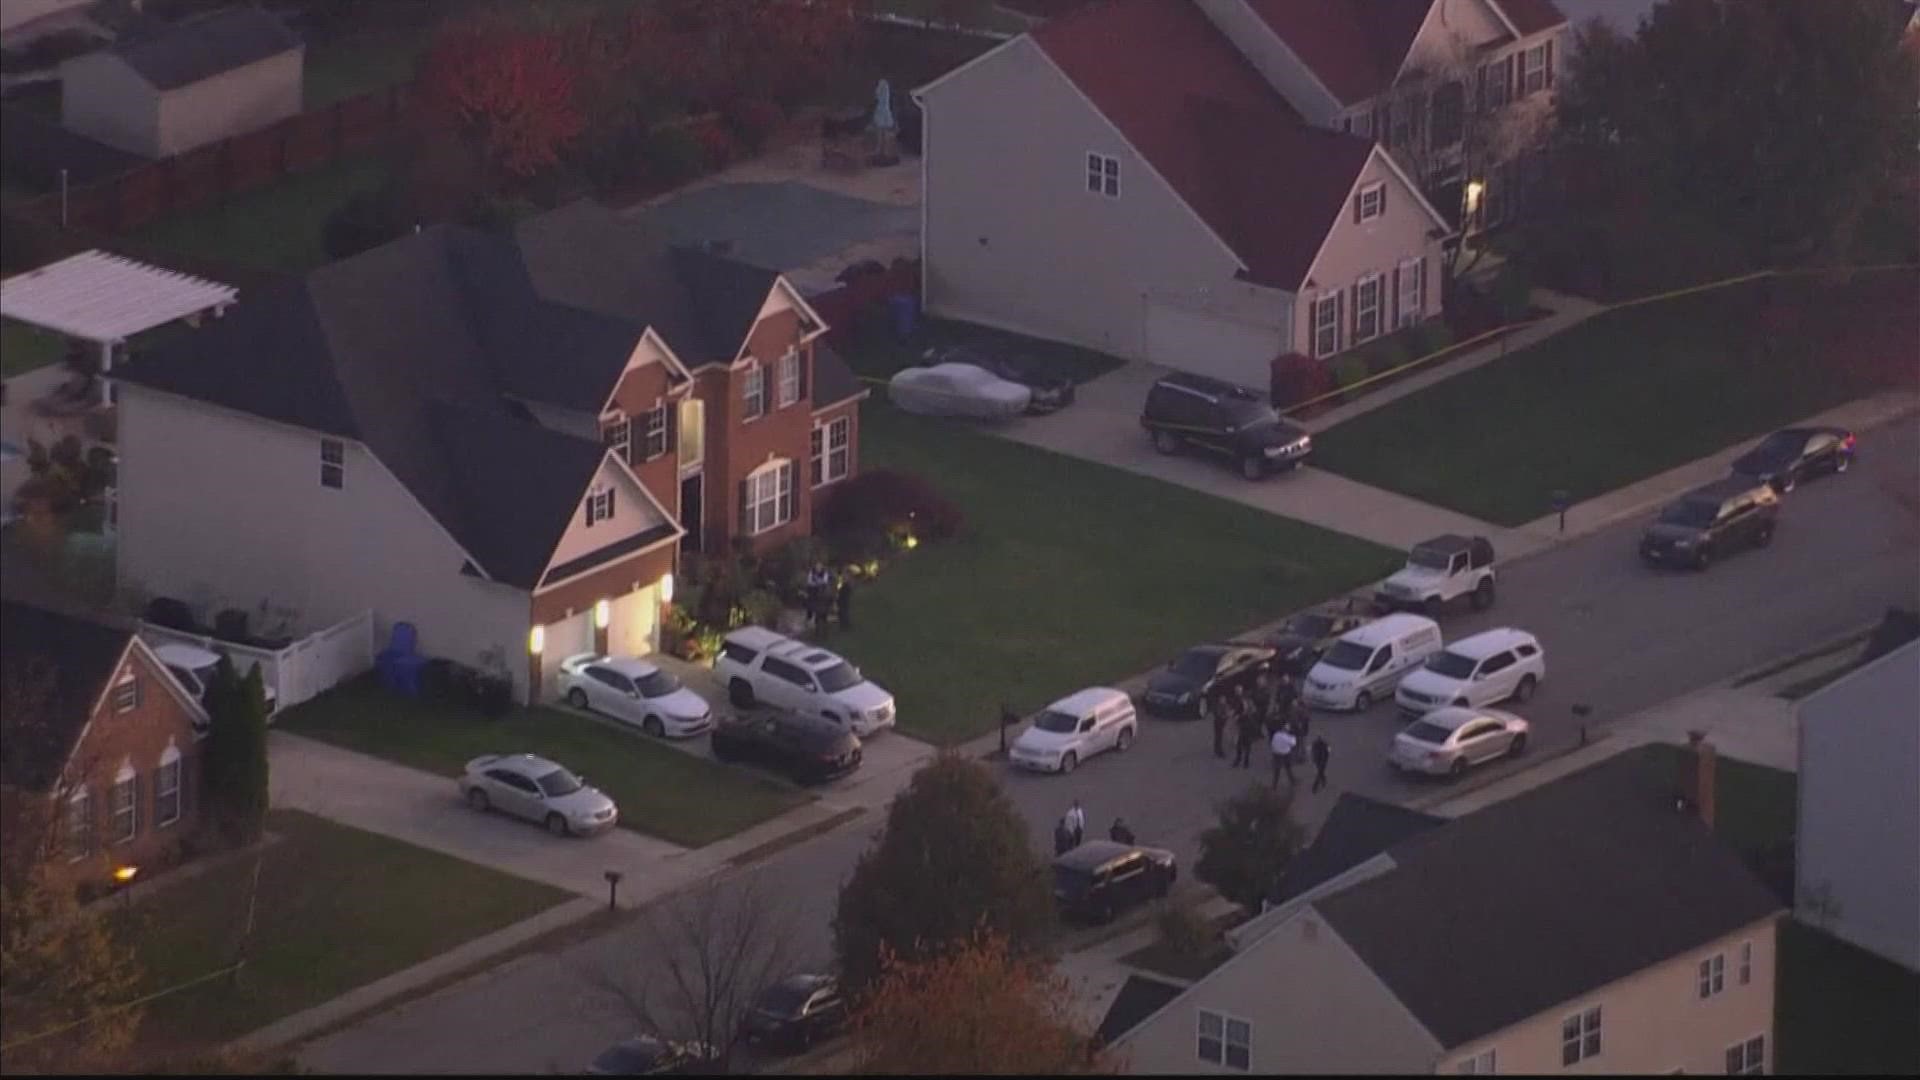 Around 4 p.m. Friday, police were called to a Maryland home. Inside, officers discovered five people dead.